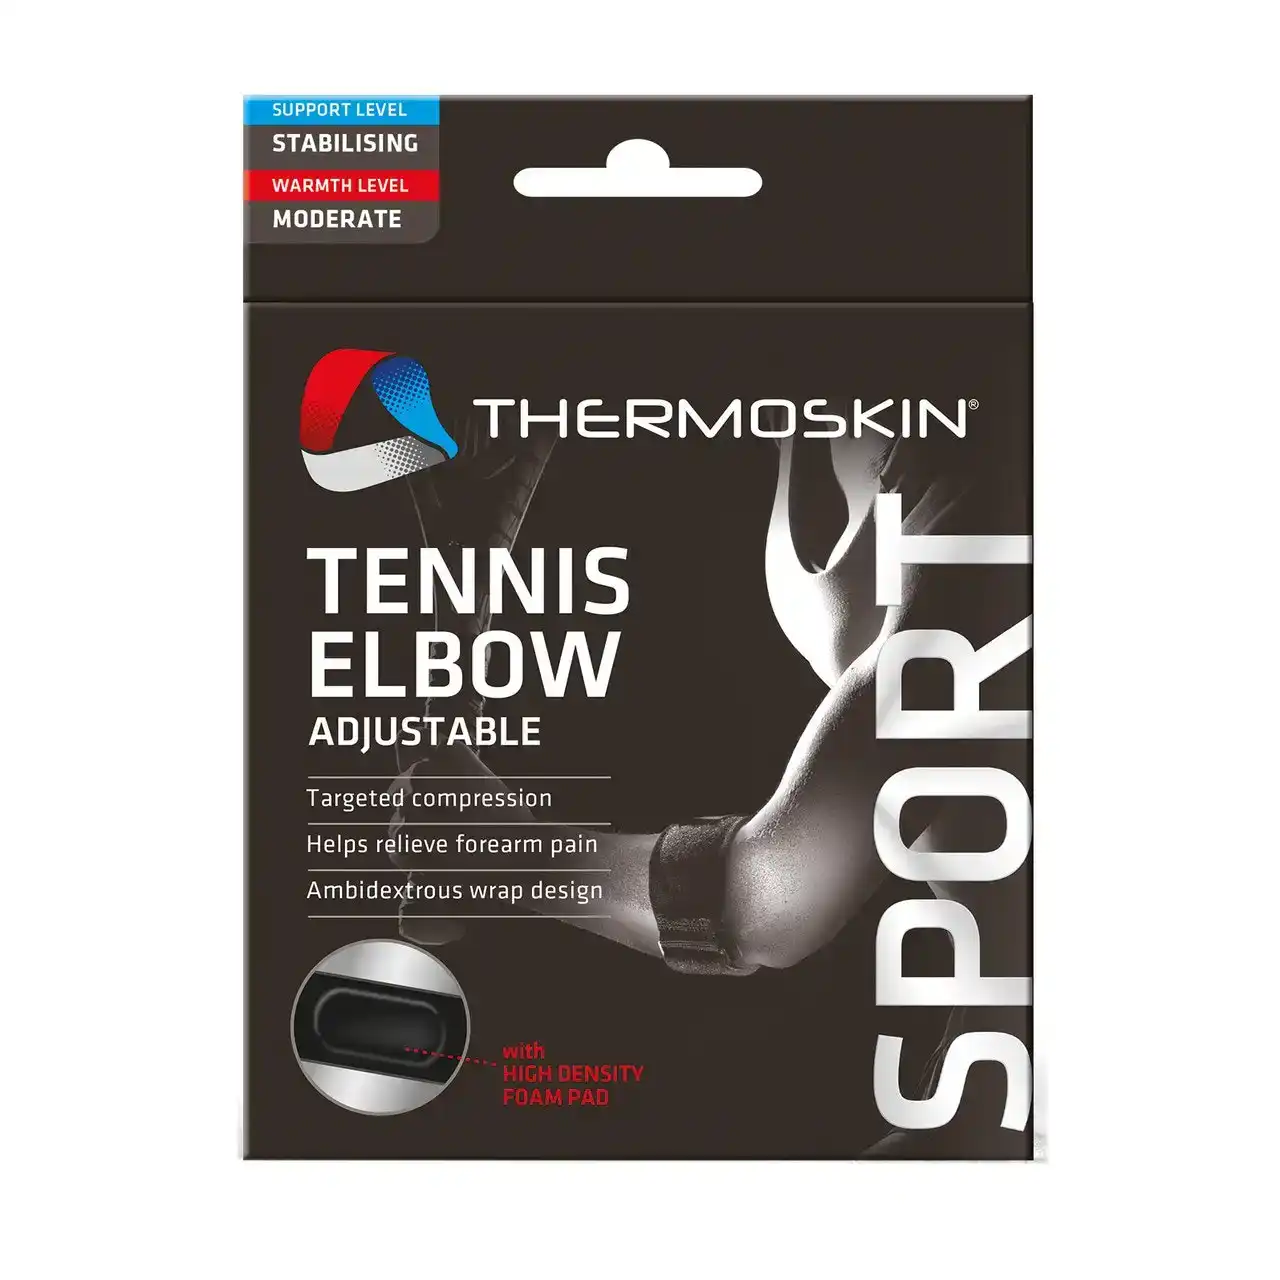 Thermoskin Adjustable Sport Tennis Elbow Support